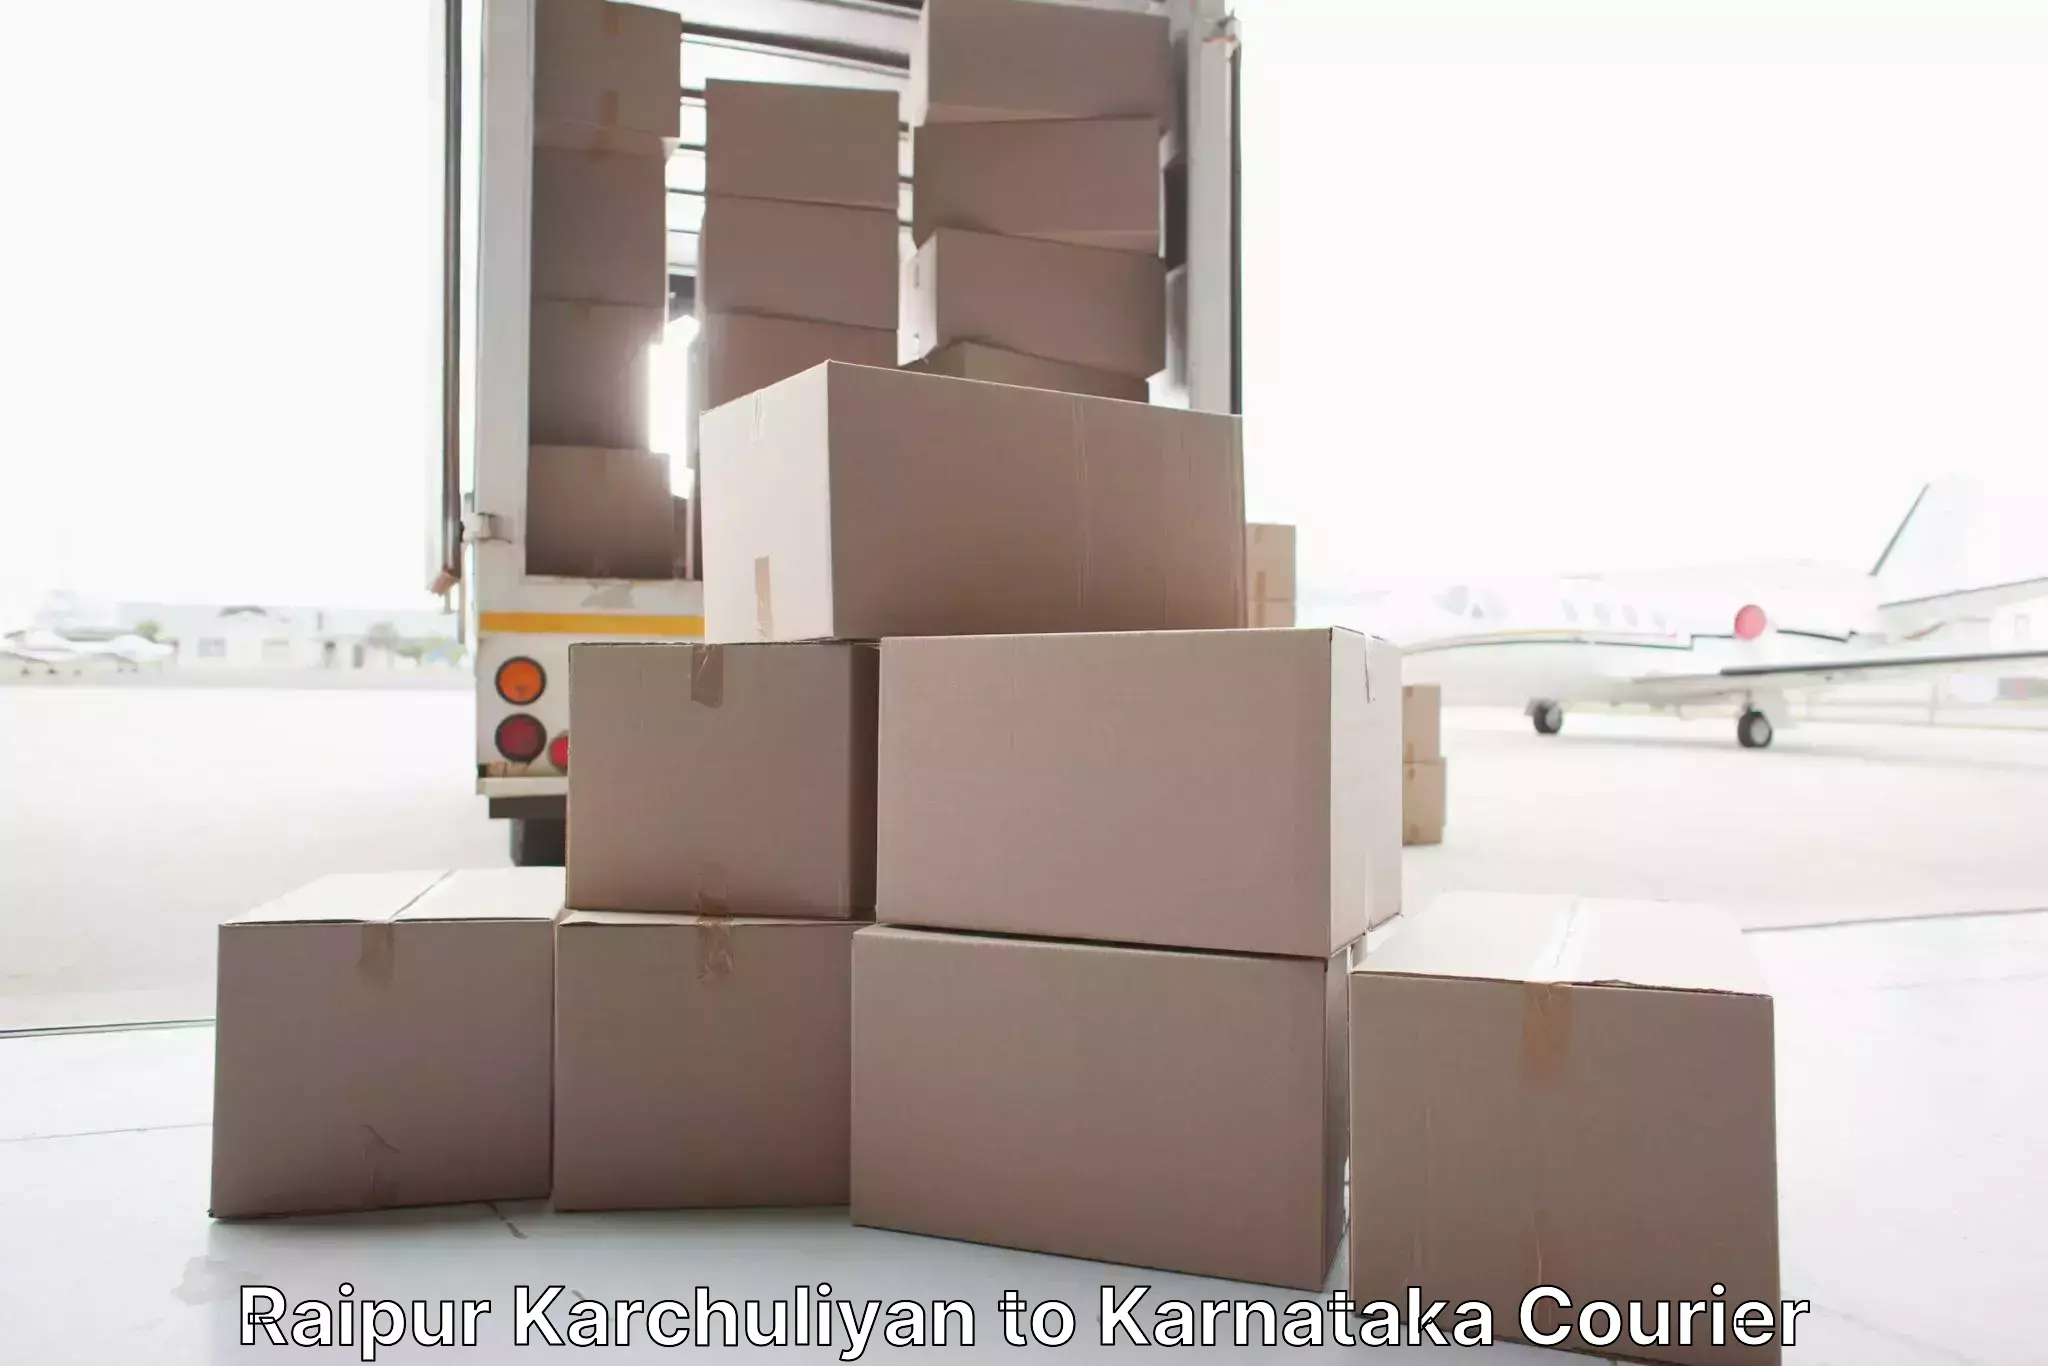 Quality relocation assistance in Raipur Karchuliyan to Hunsur